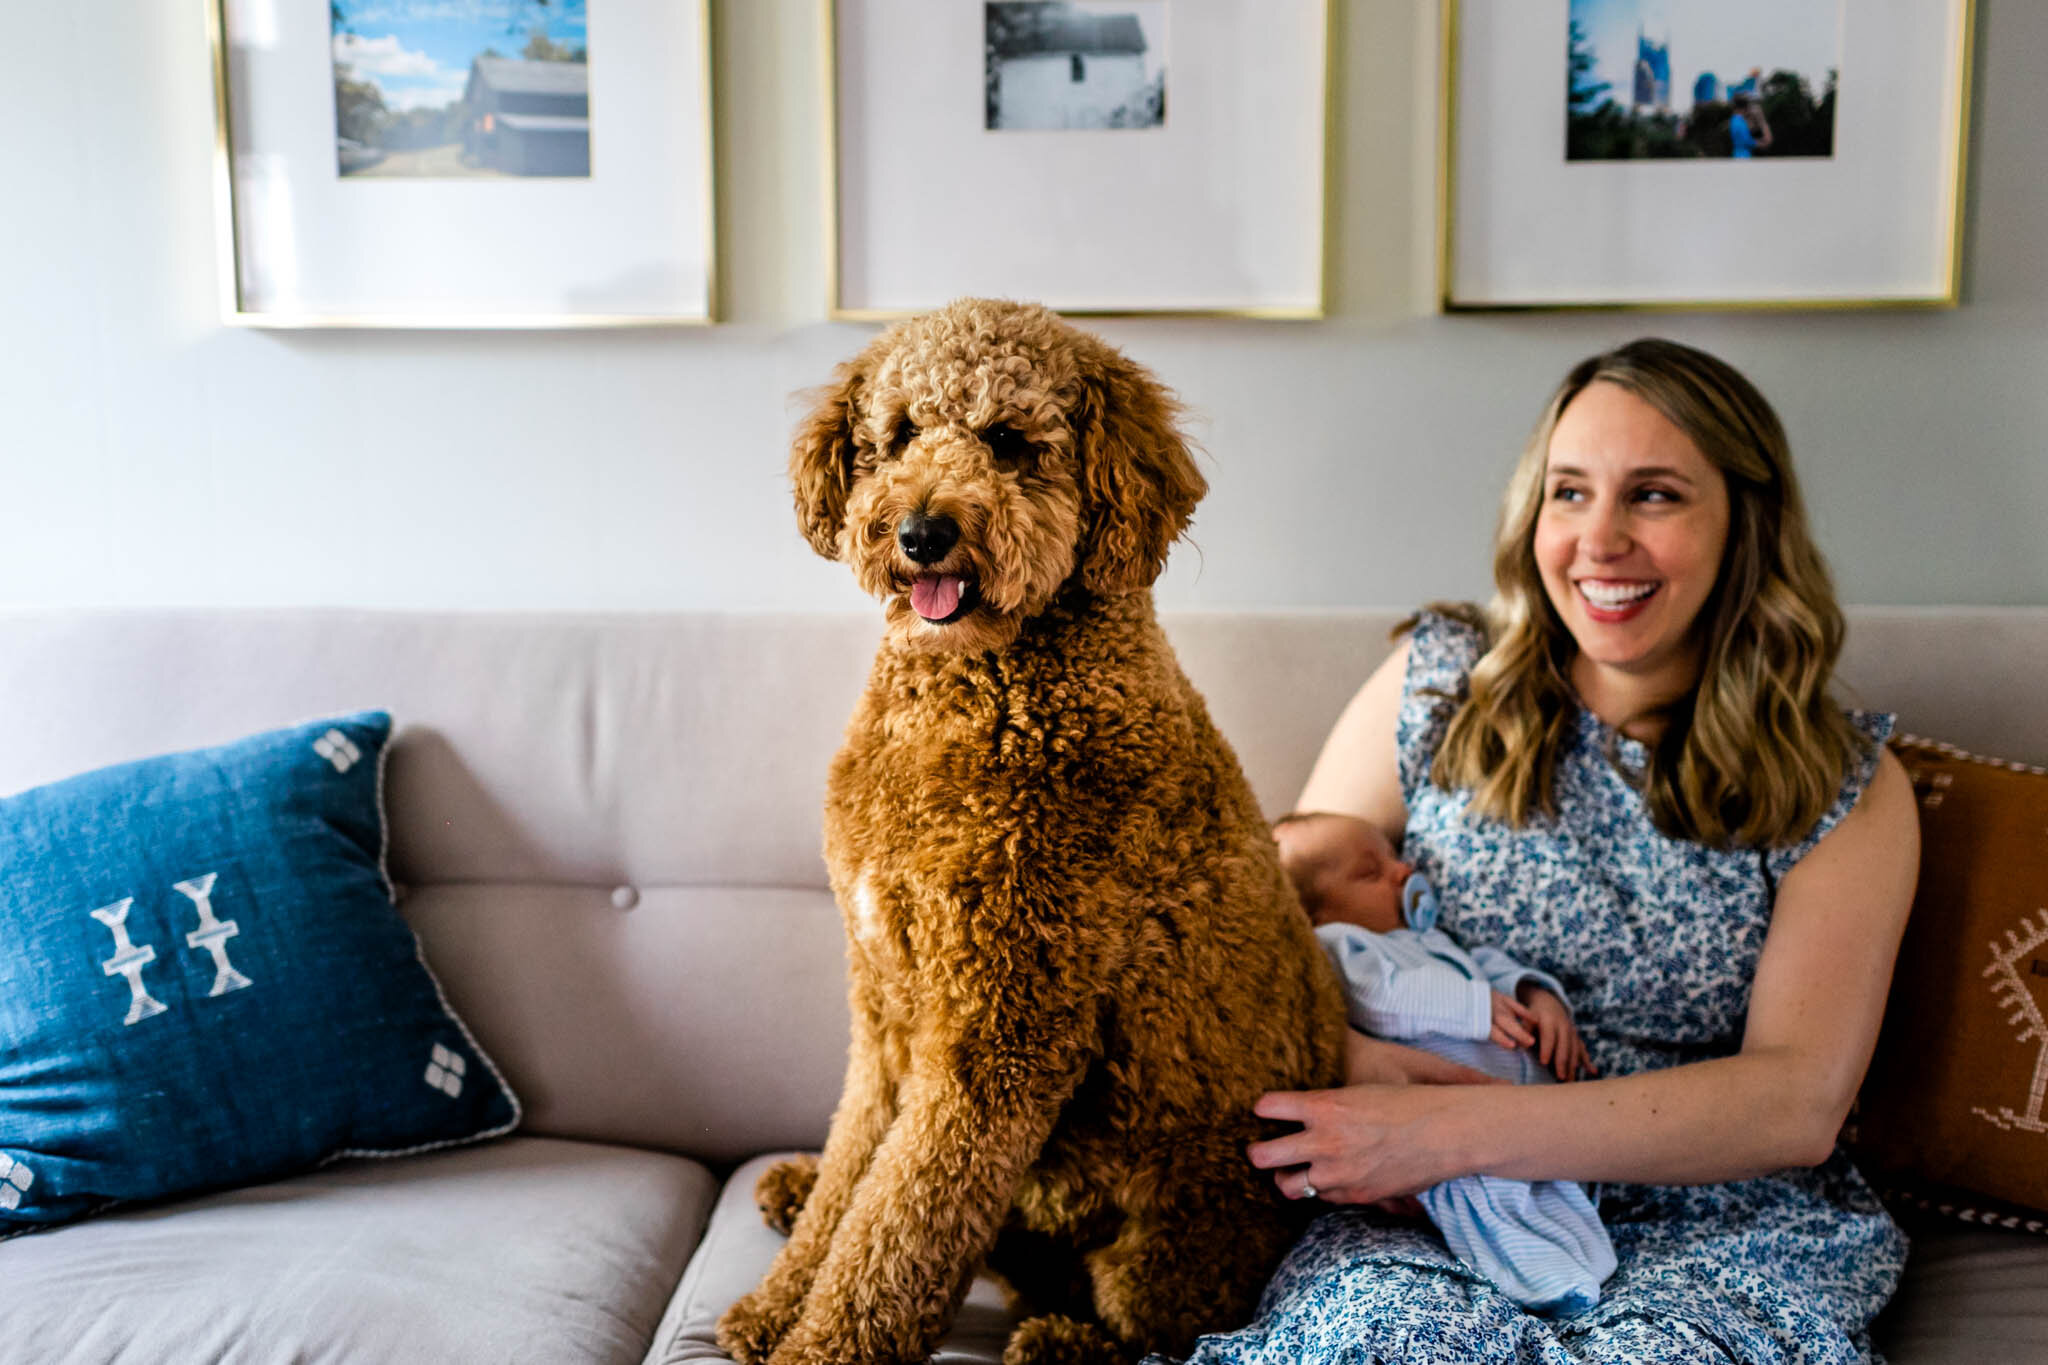 Dog sitting on couch with woman | Greensboro Newborn Photographer | By G. Lin Photography